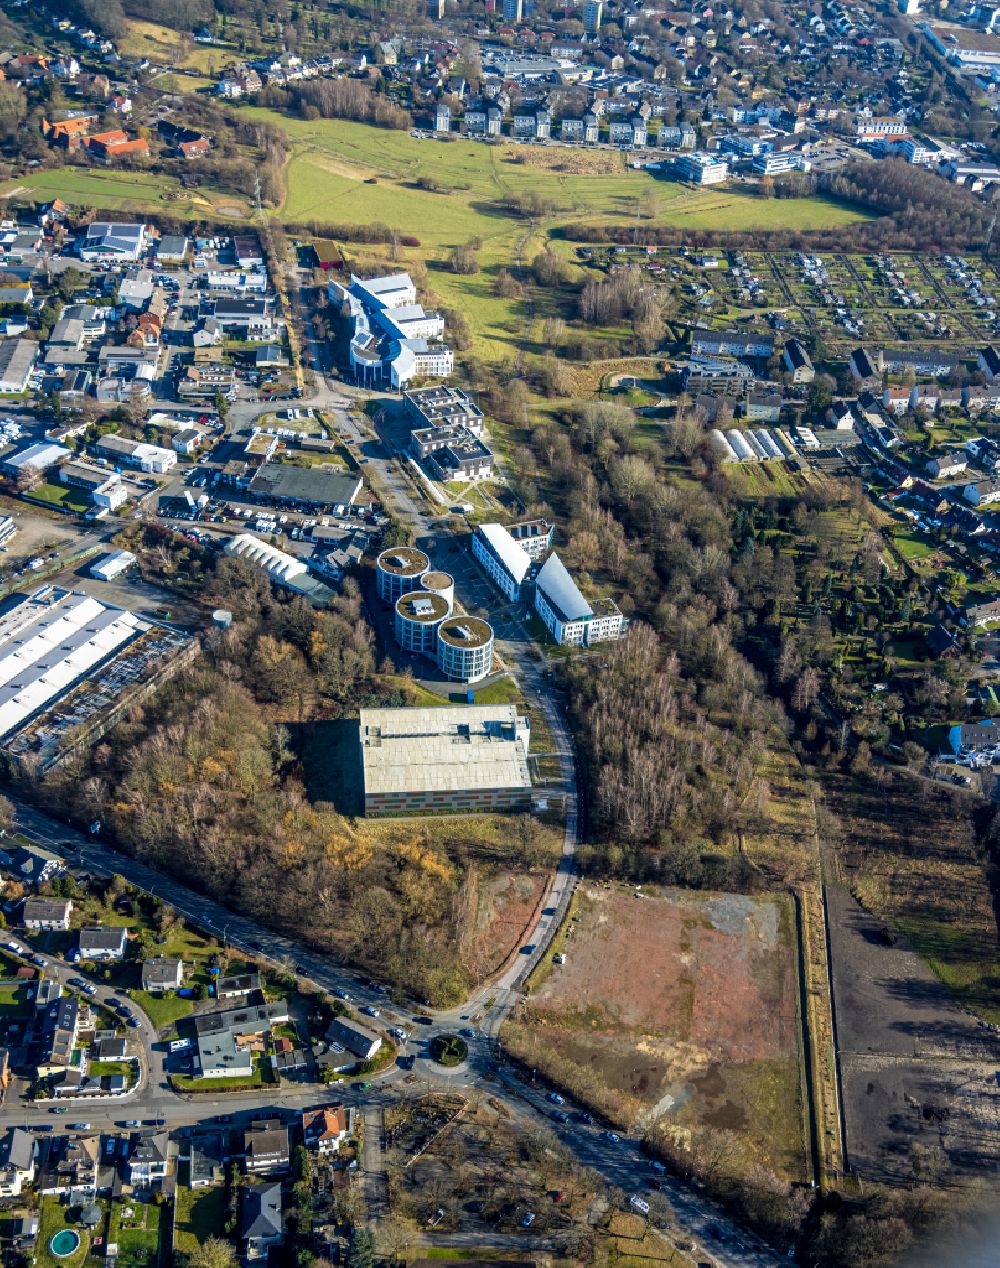 Aerial image Wullen - Construction site for the new construction of a health center and medical center on Pferdebachstrasse - Alfred-Herrhausen-Strasse in Wullen in the Ruhr area in the state of North Rhine-Westphalia, Germany